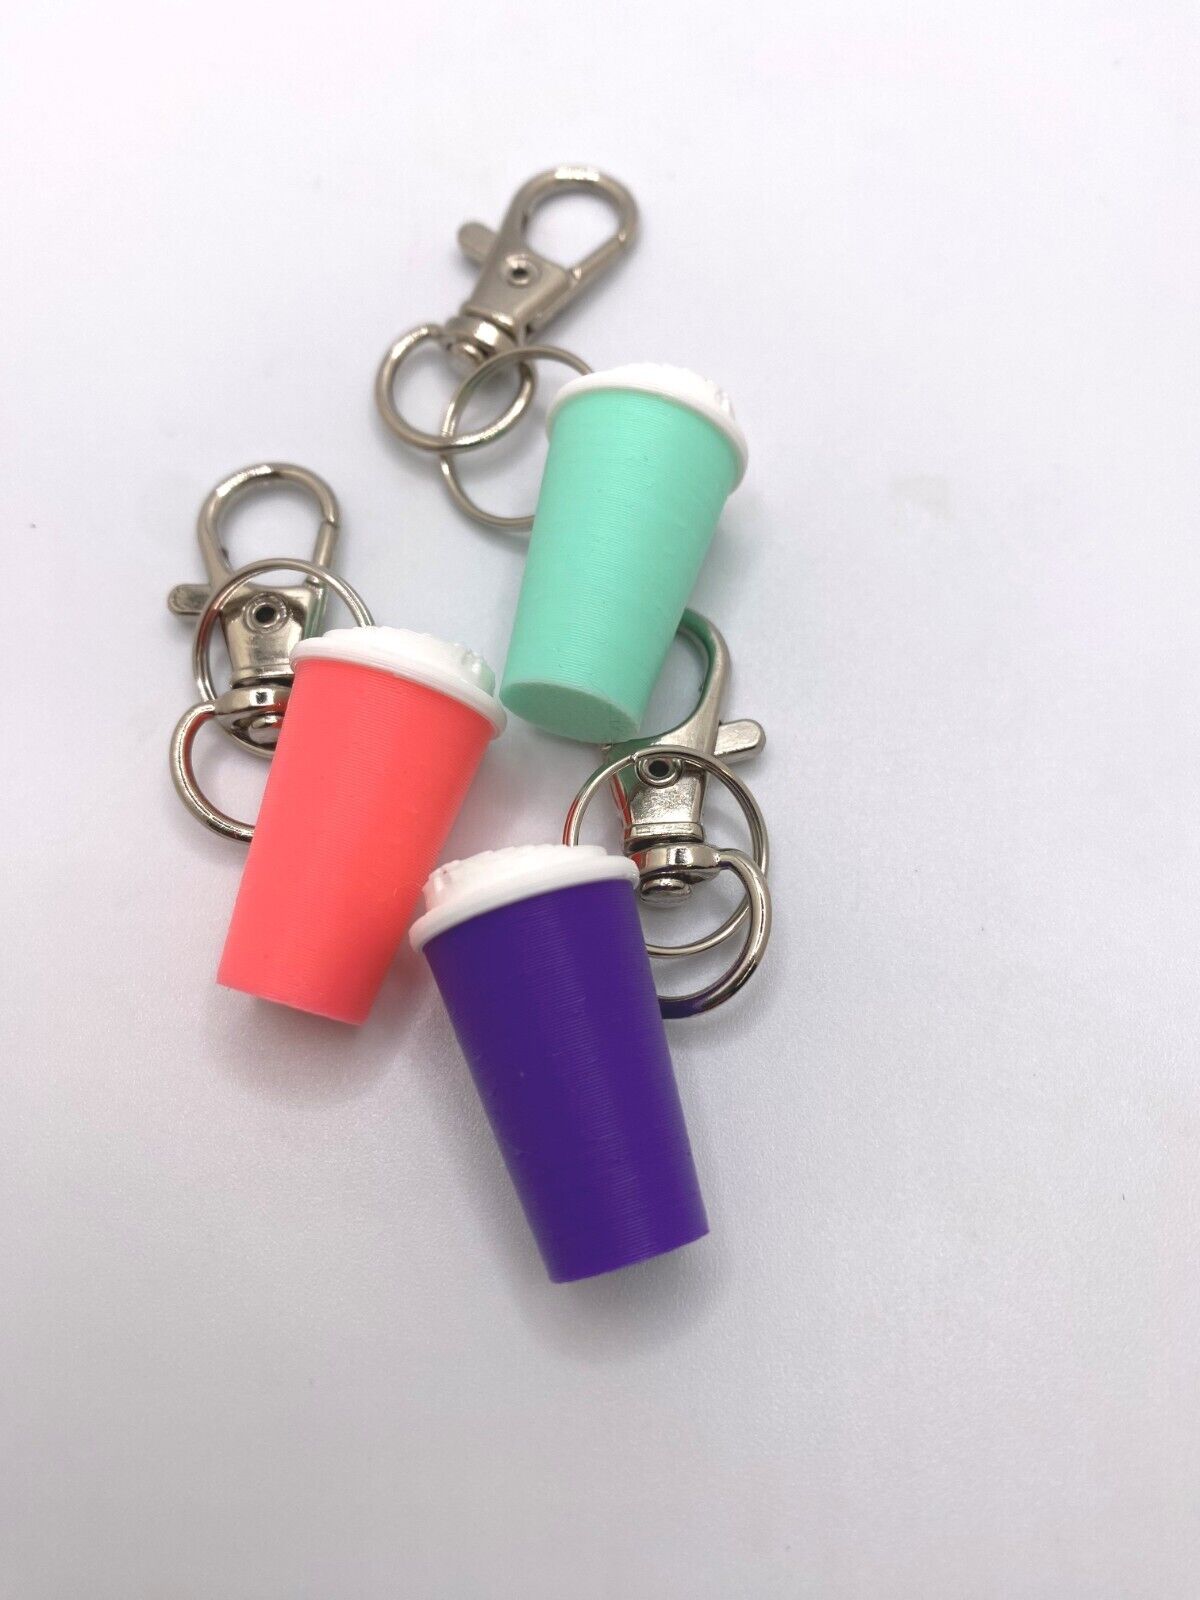 Cute small Coffee Cup Keychain to attach to a purse, backpack or keyring.